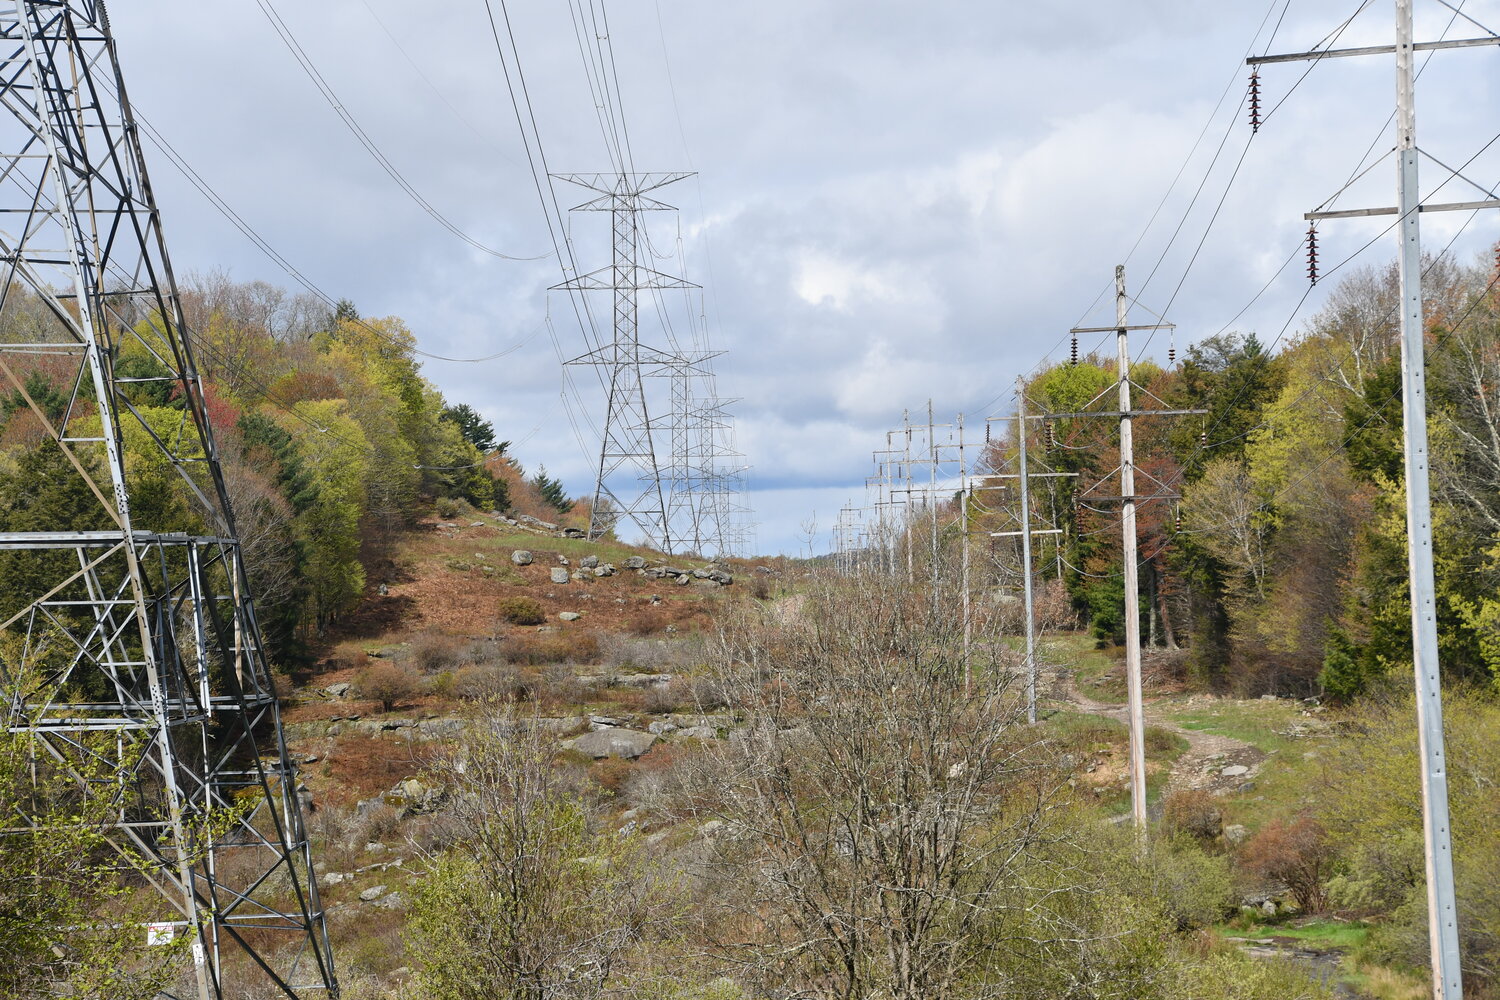 Clean Path NY will be developing a 175-mile underground transmission line along the same path as the Marcy South Transmission Line, seen here as it goes through Sackett Lake.